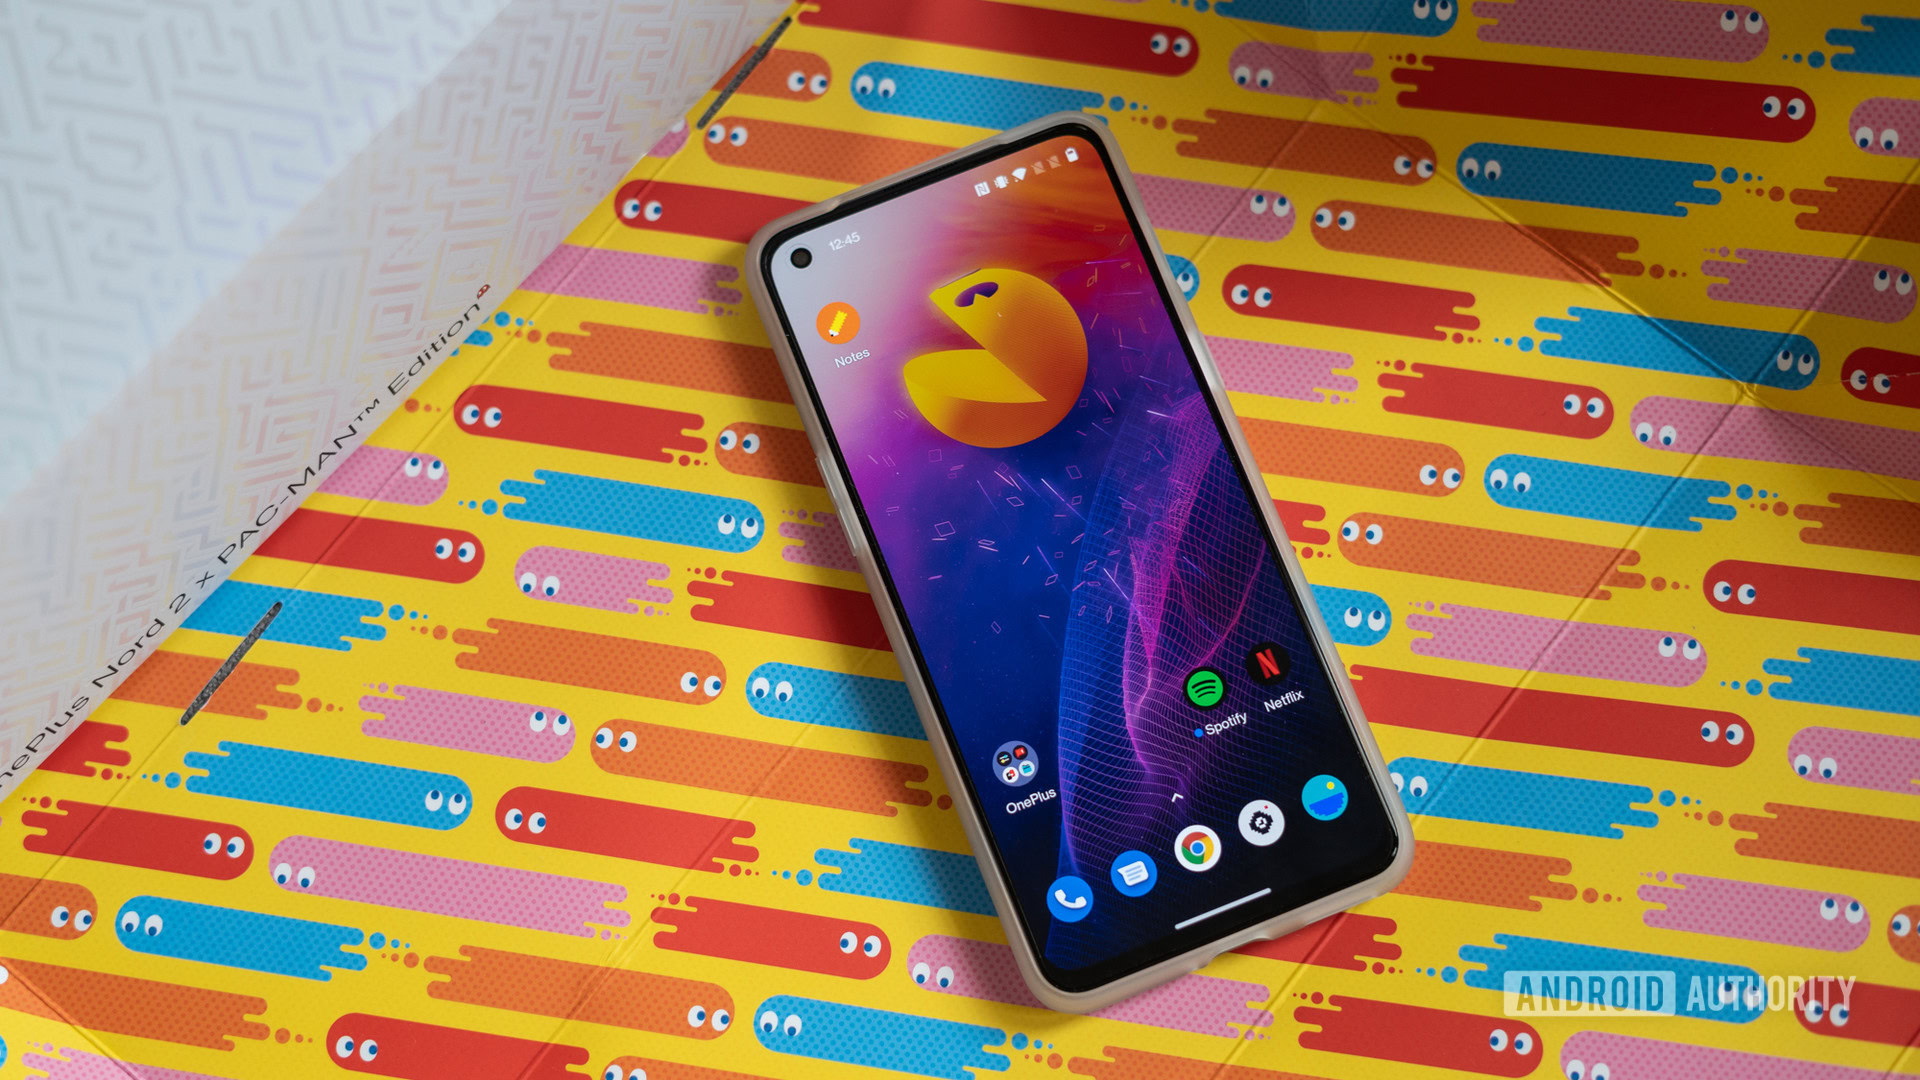 OnePlus 2 Pac-Man edition hands-on: A fun retro gaming throwback phone